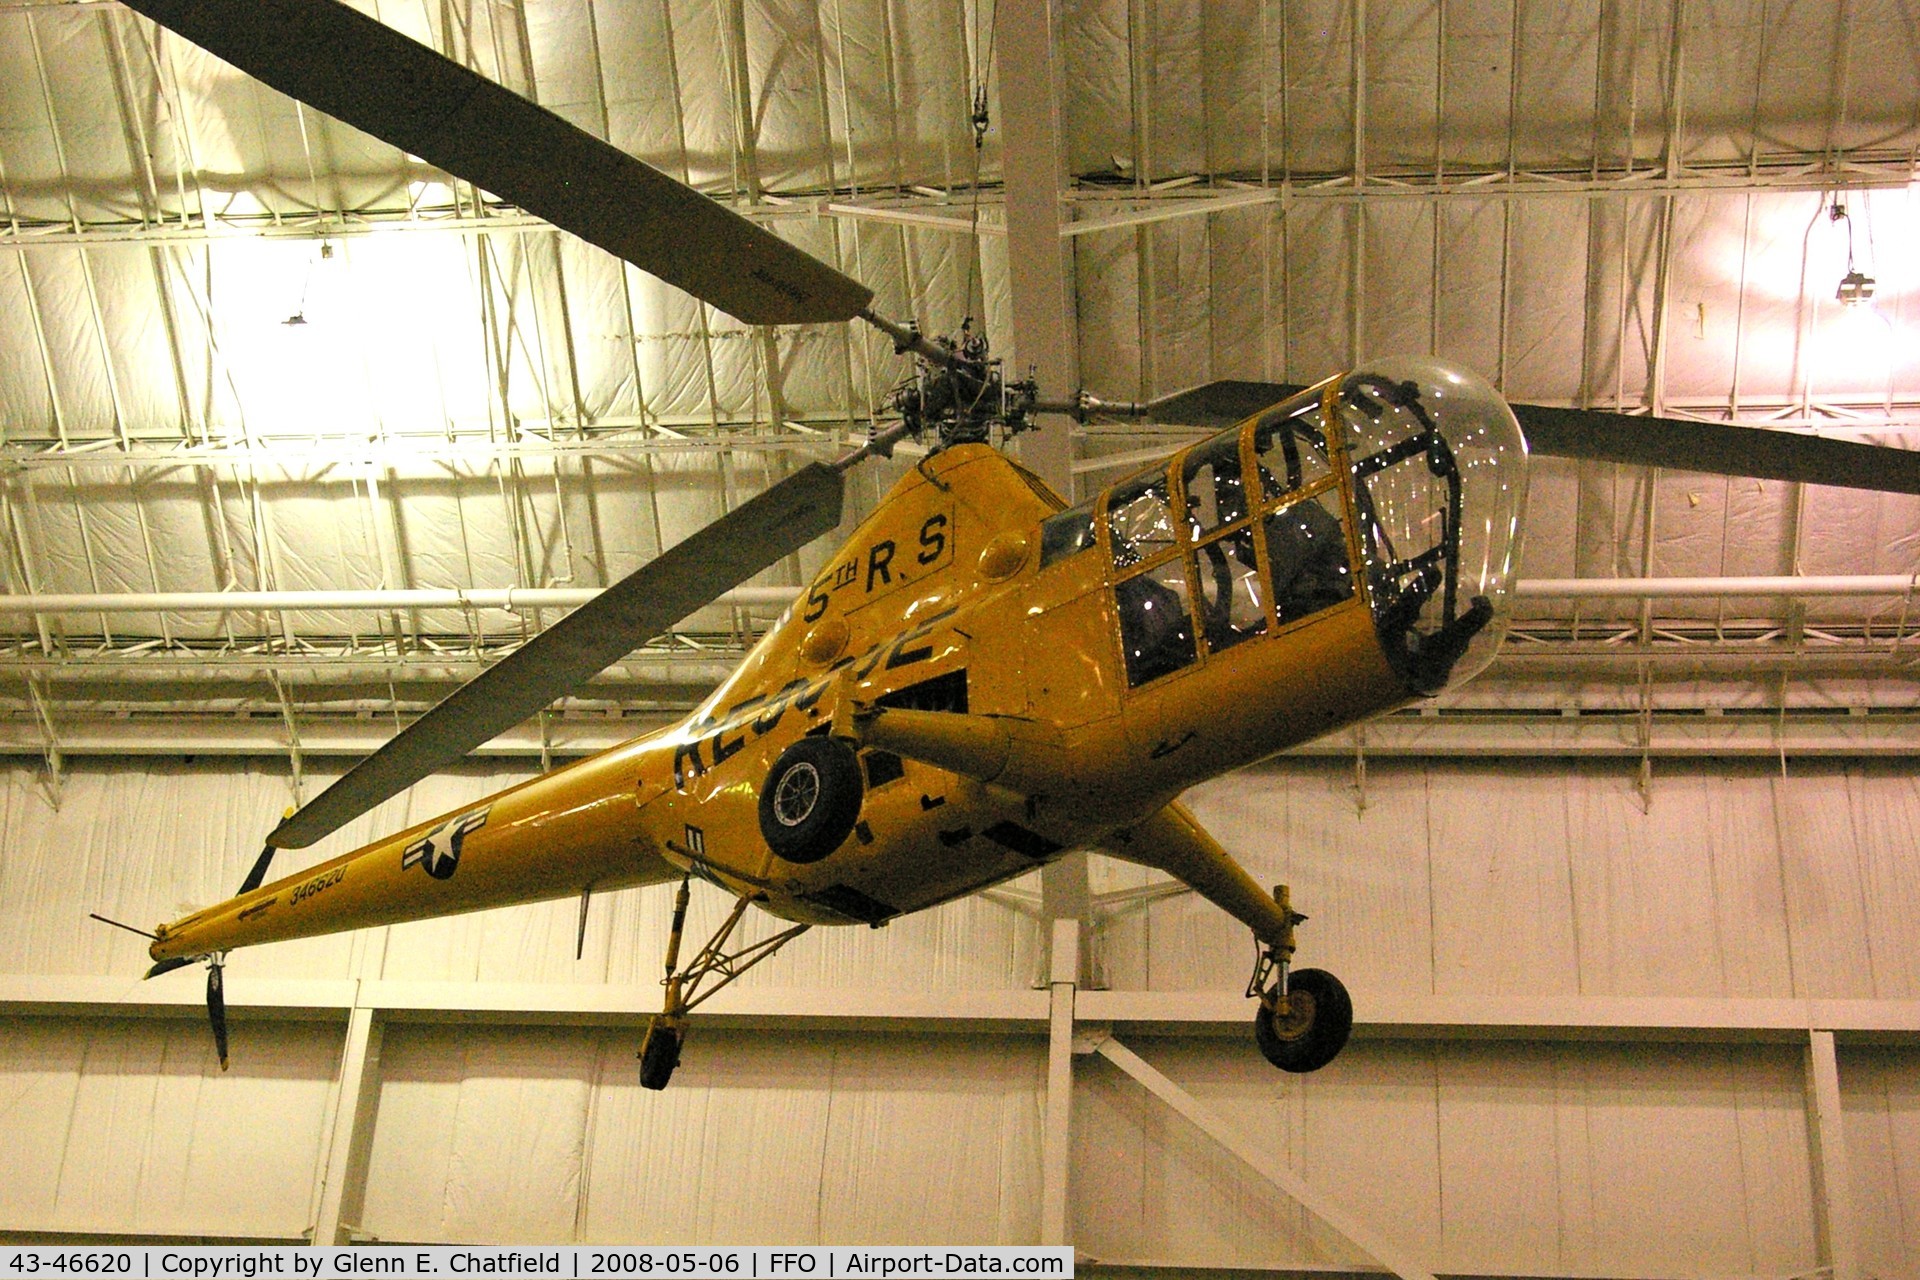 43-46620, 1943 Sikorsky YH-5A C/N 164, Hanging from the ceiling in the National Museum of the U.S. Air Force